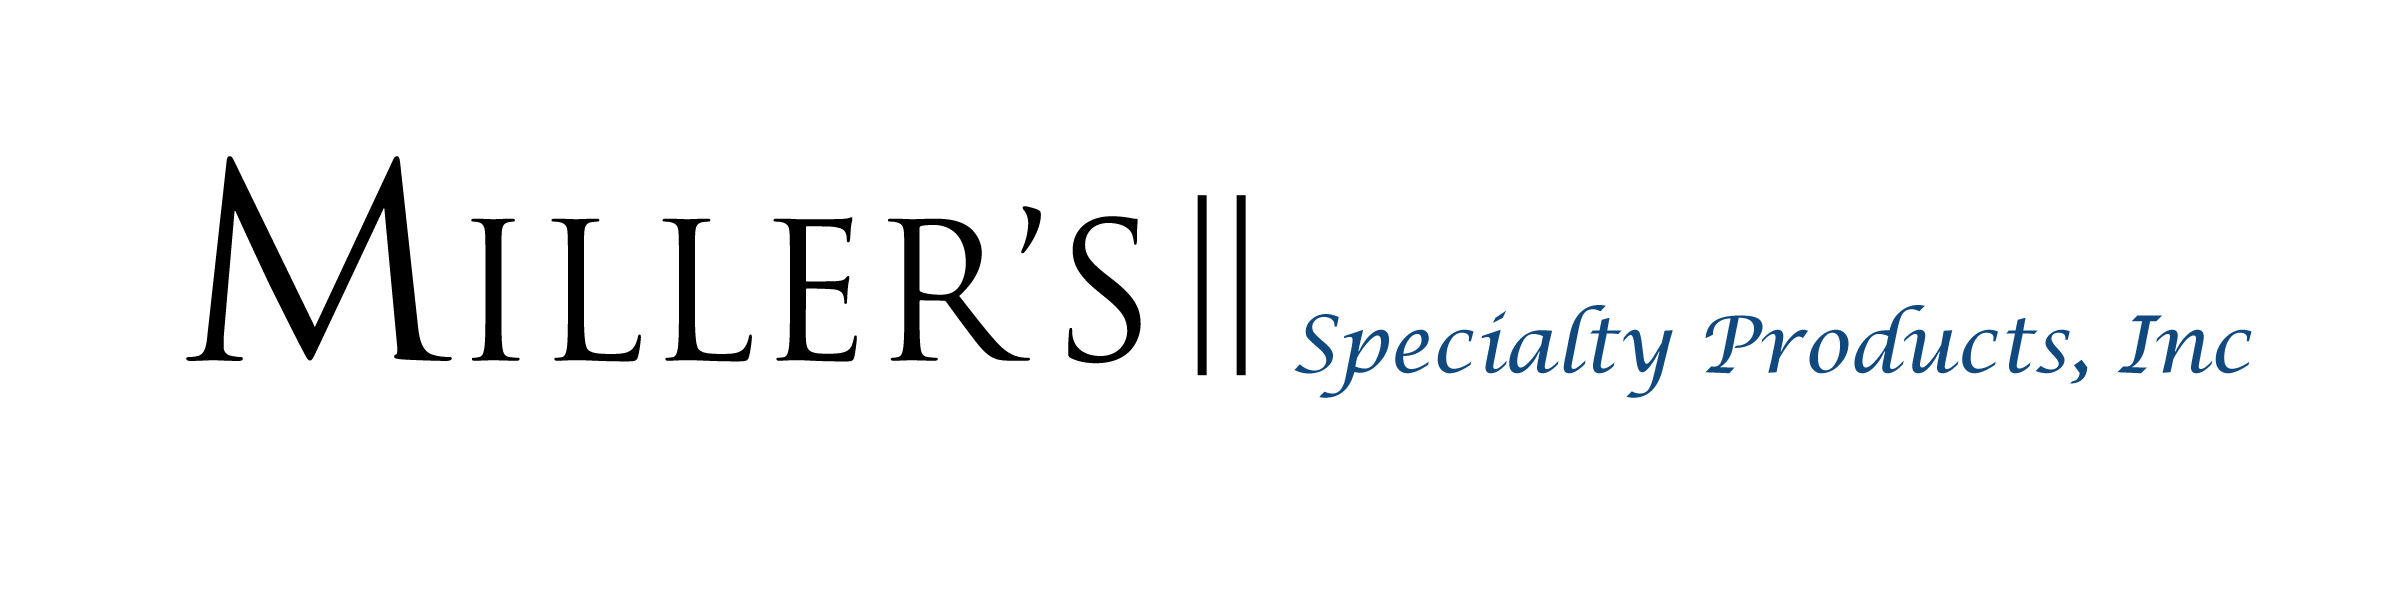 Miller's Specialty Products, Inc's Logo